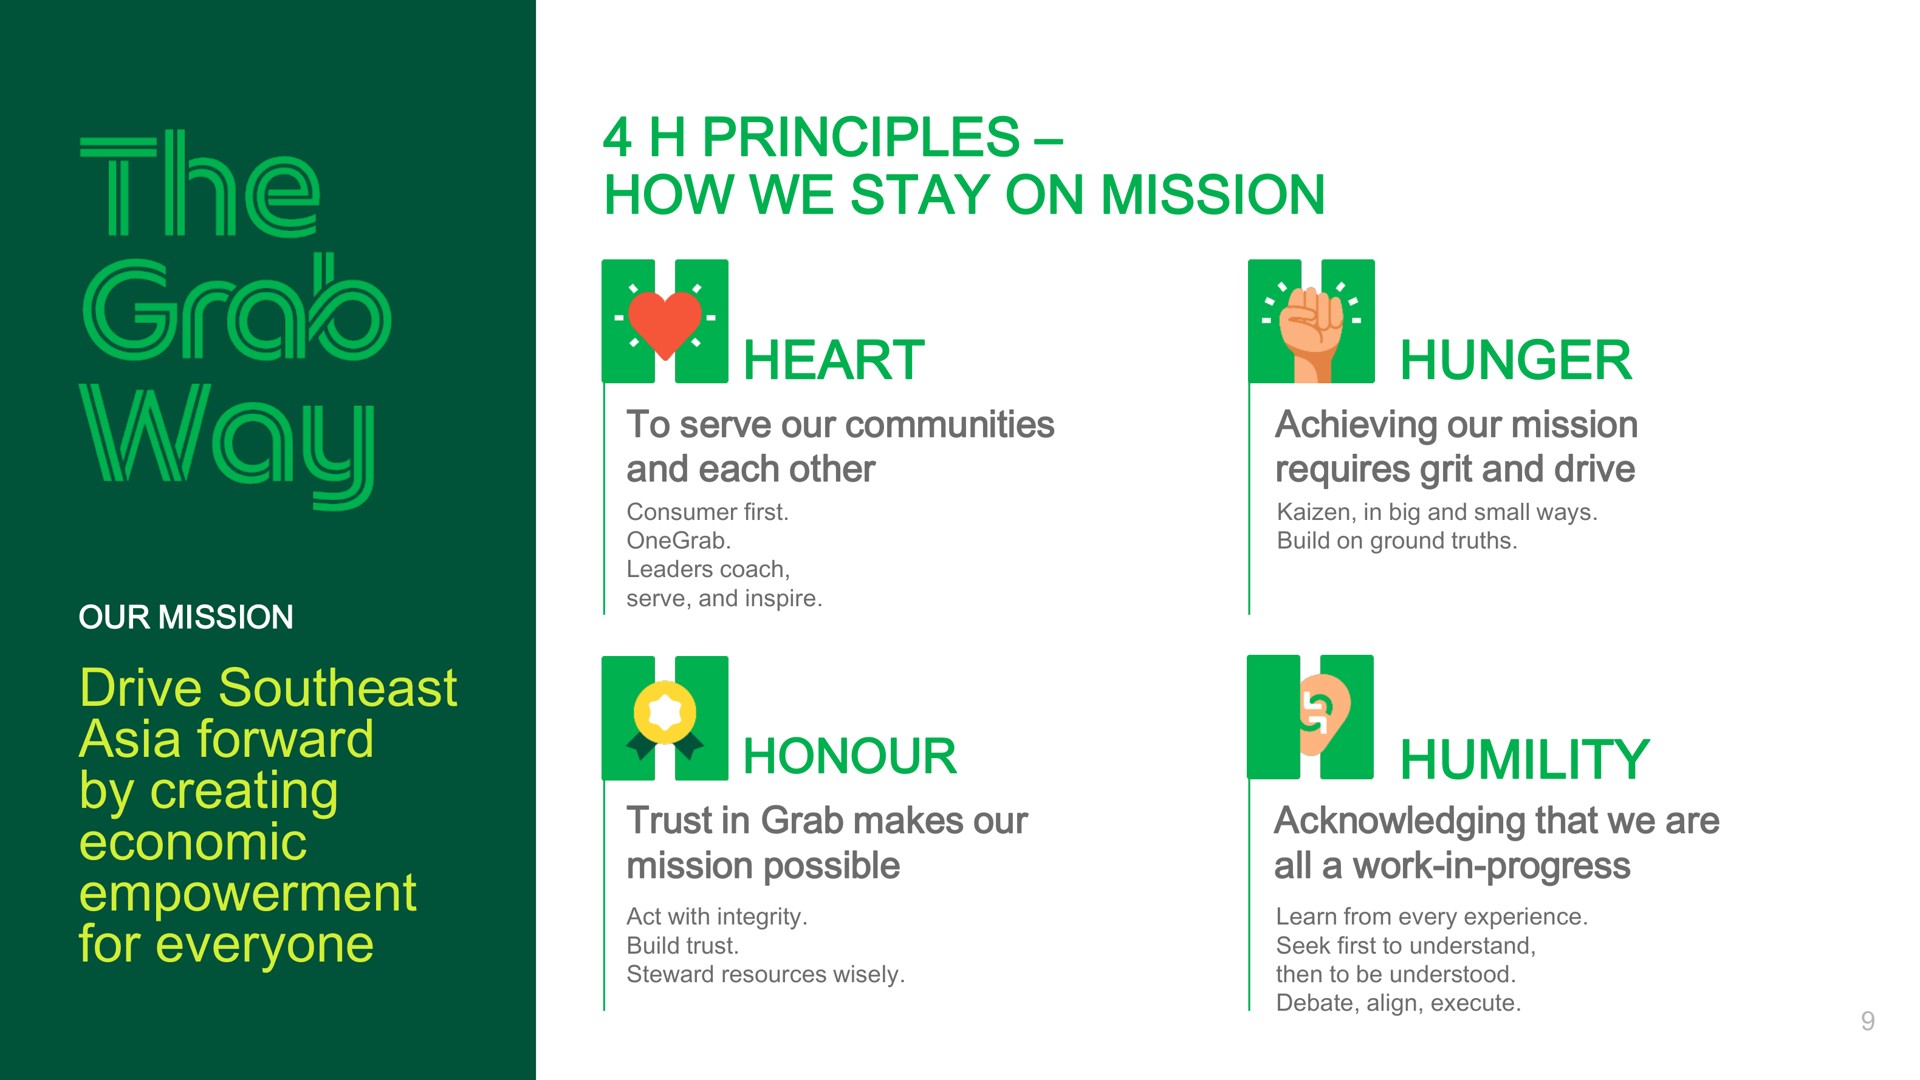 principles how we stay on mission heart to serve our communities and each other trust in grab makes our mission possible hunger achieving our mission requires grit and drive humility acknowledging that we are all a work in progress drive southeast forward by creating economic empowerment for everyone | Grab